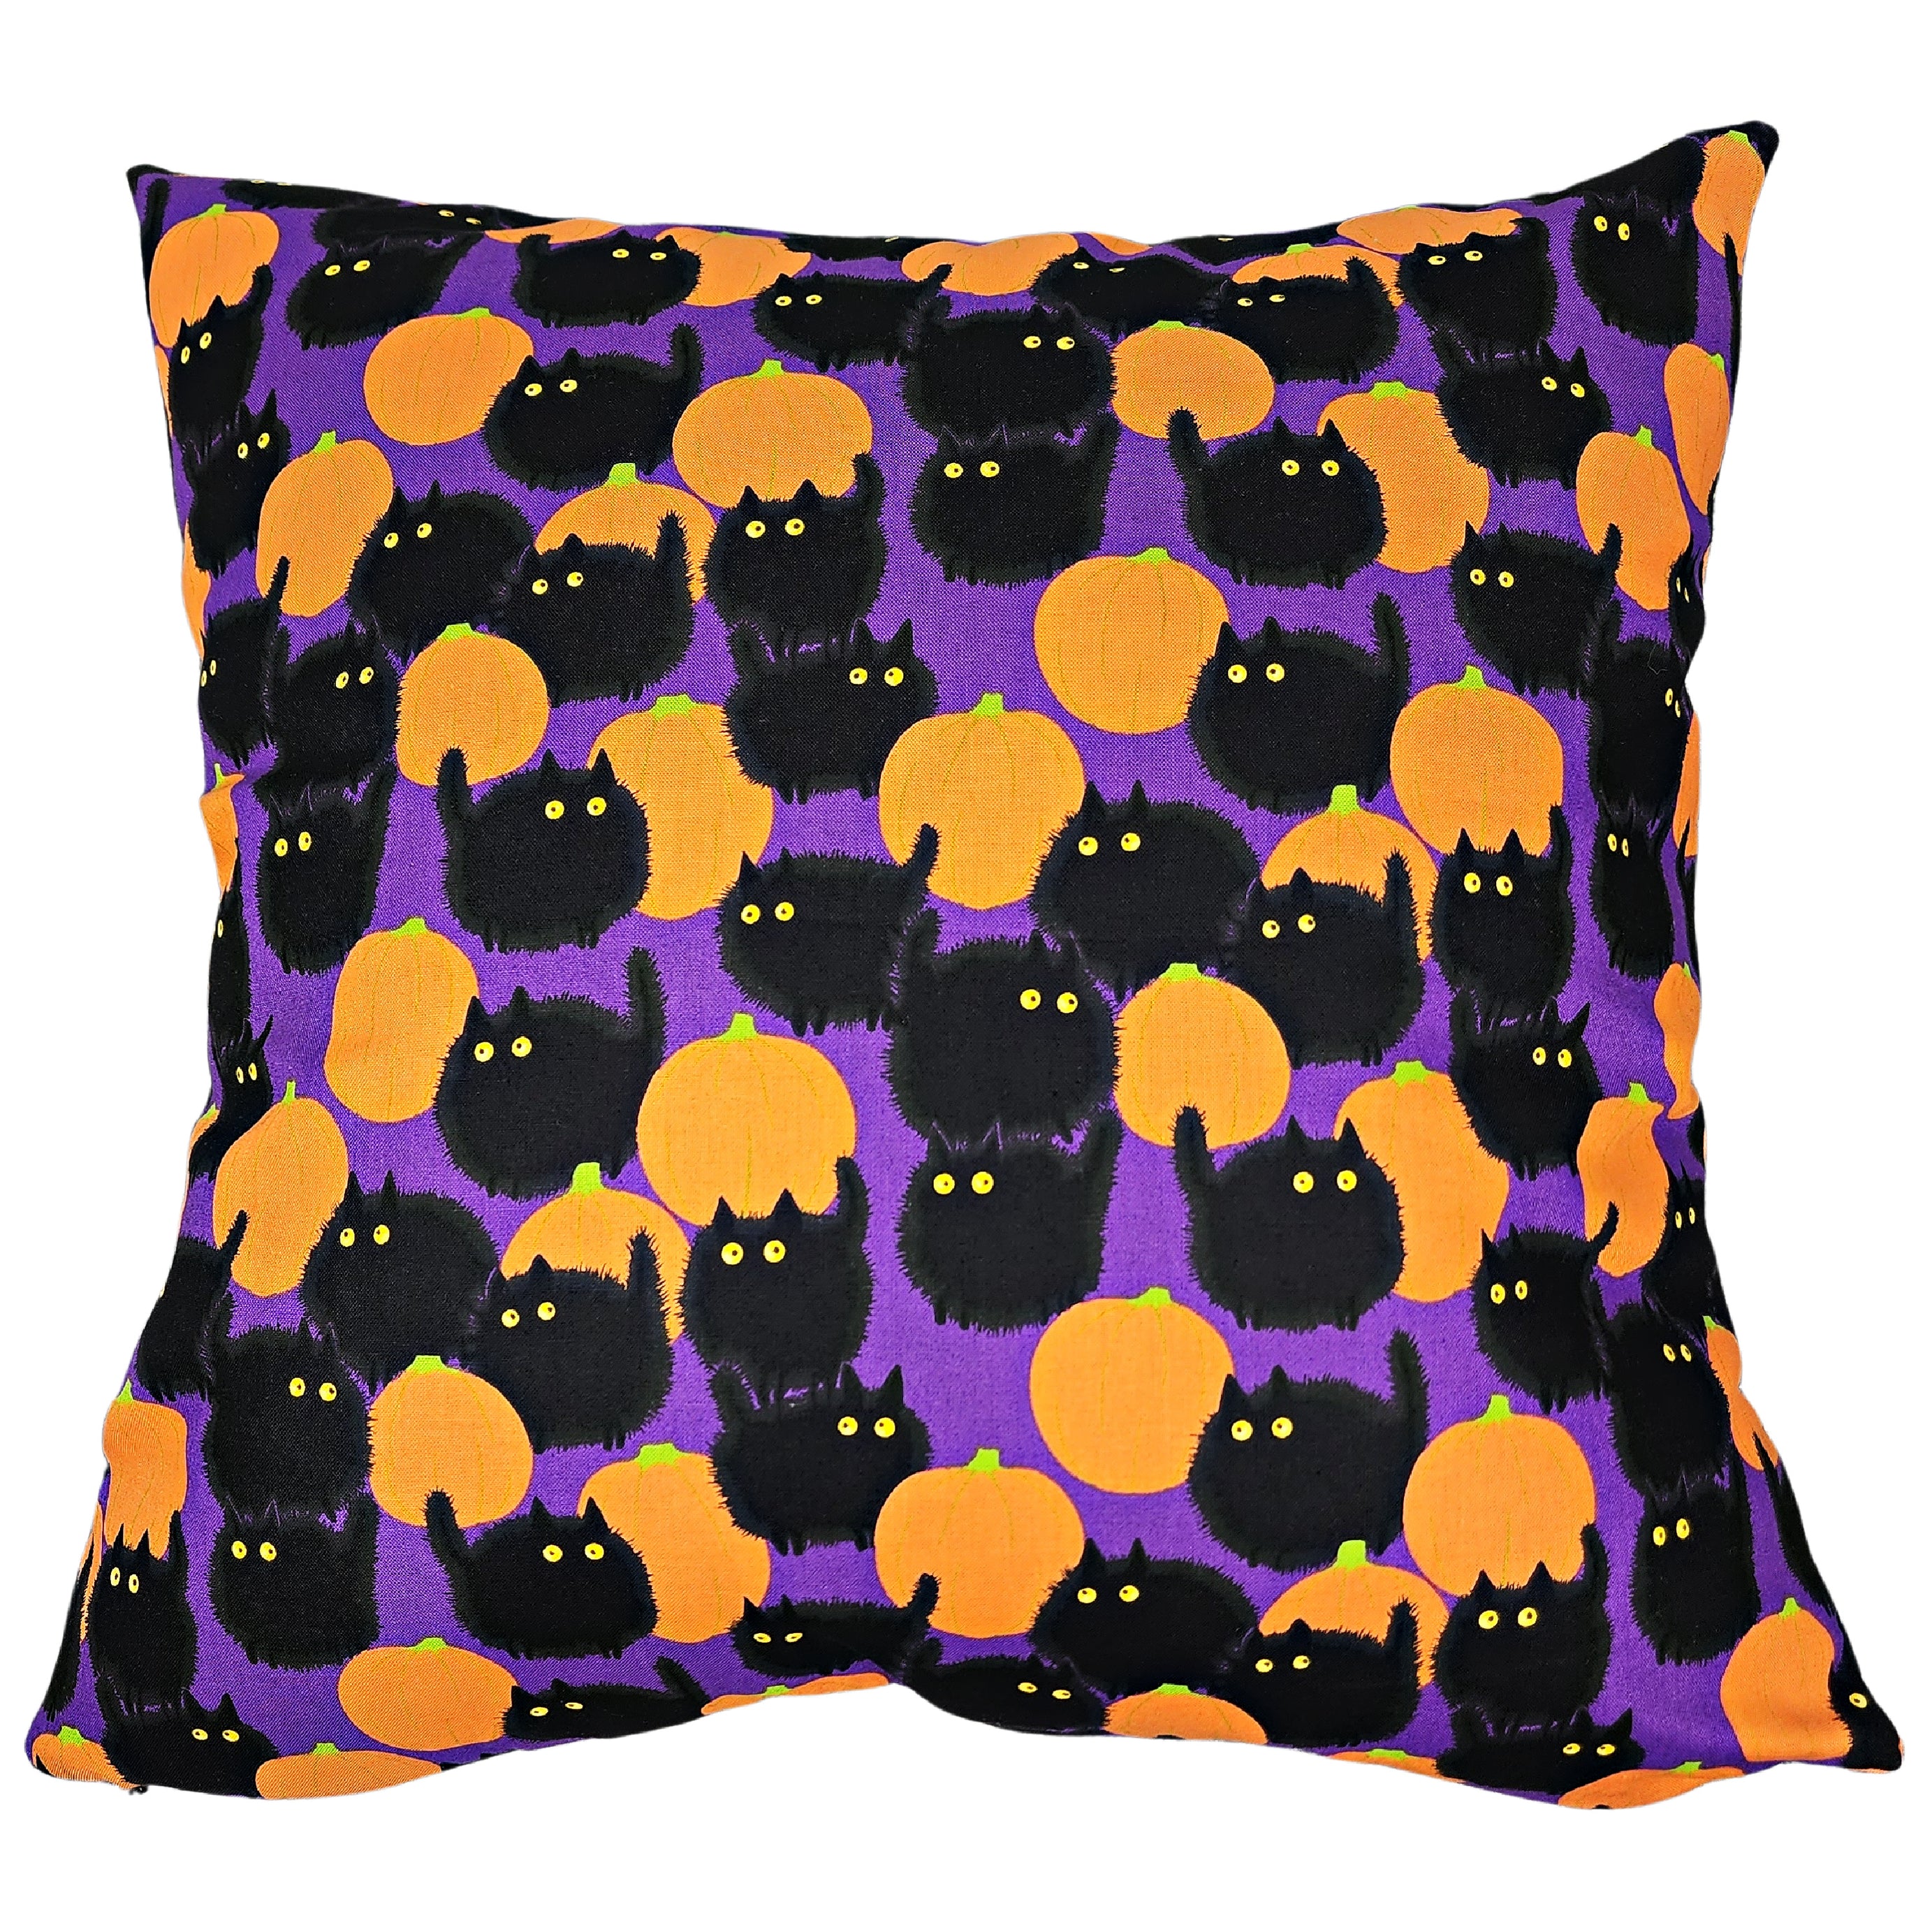 Purple Scaredy Cats Halloween Throw Pillow Cover, 18 x 18